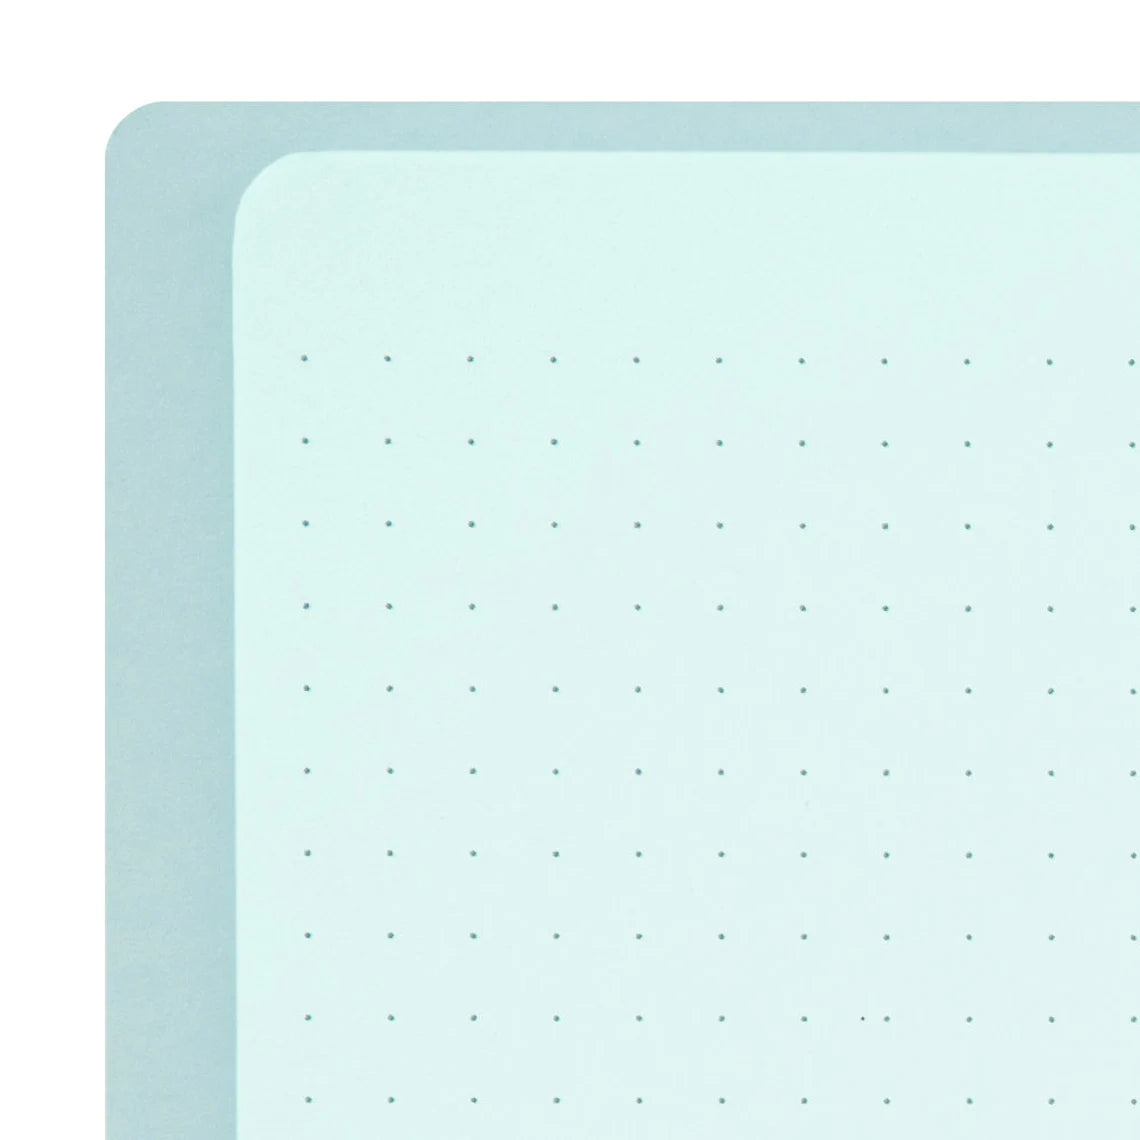 Midori Blue A5 Ring Dotted Notebook smooth blue paper - Paper Kooka Australia